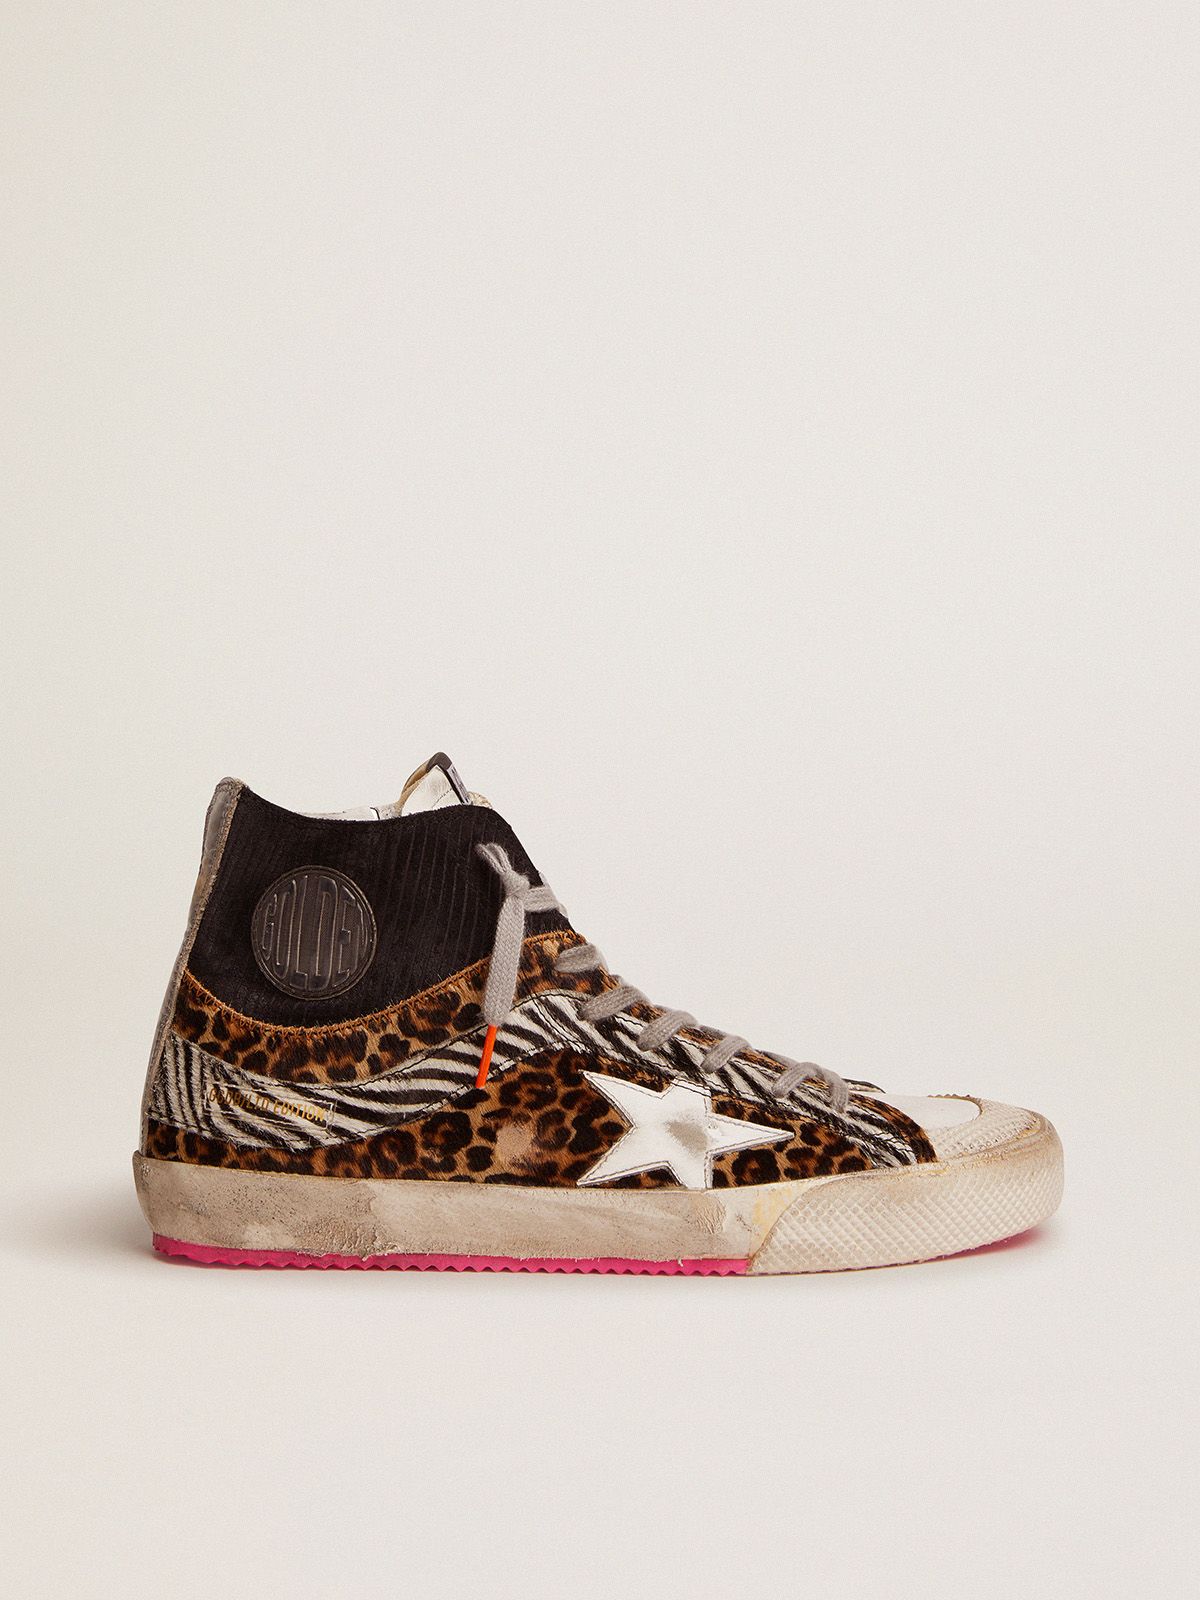 golden goose skin Francy corduroy-print upper suede and pony LAB sneakers black with